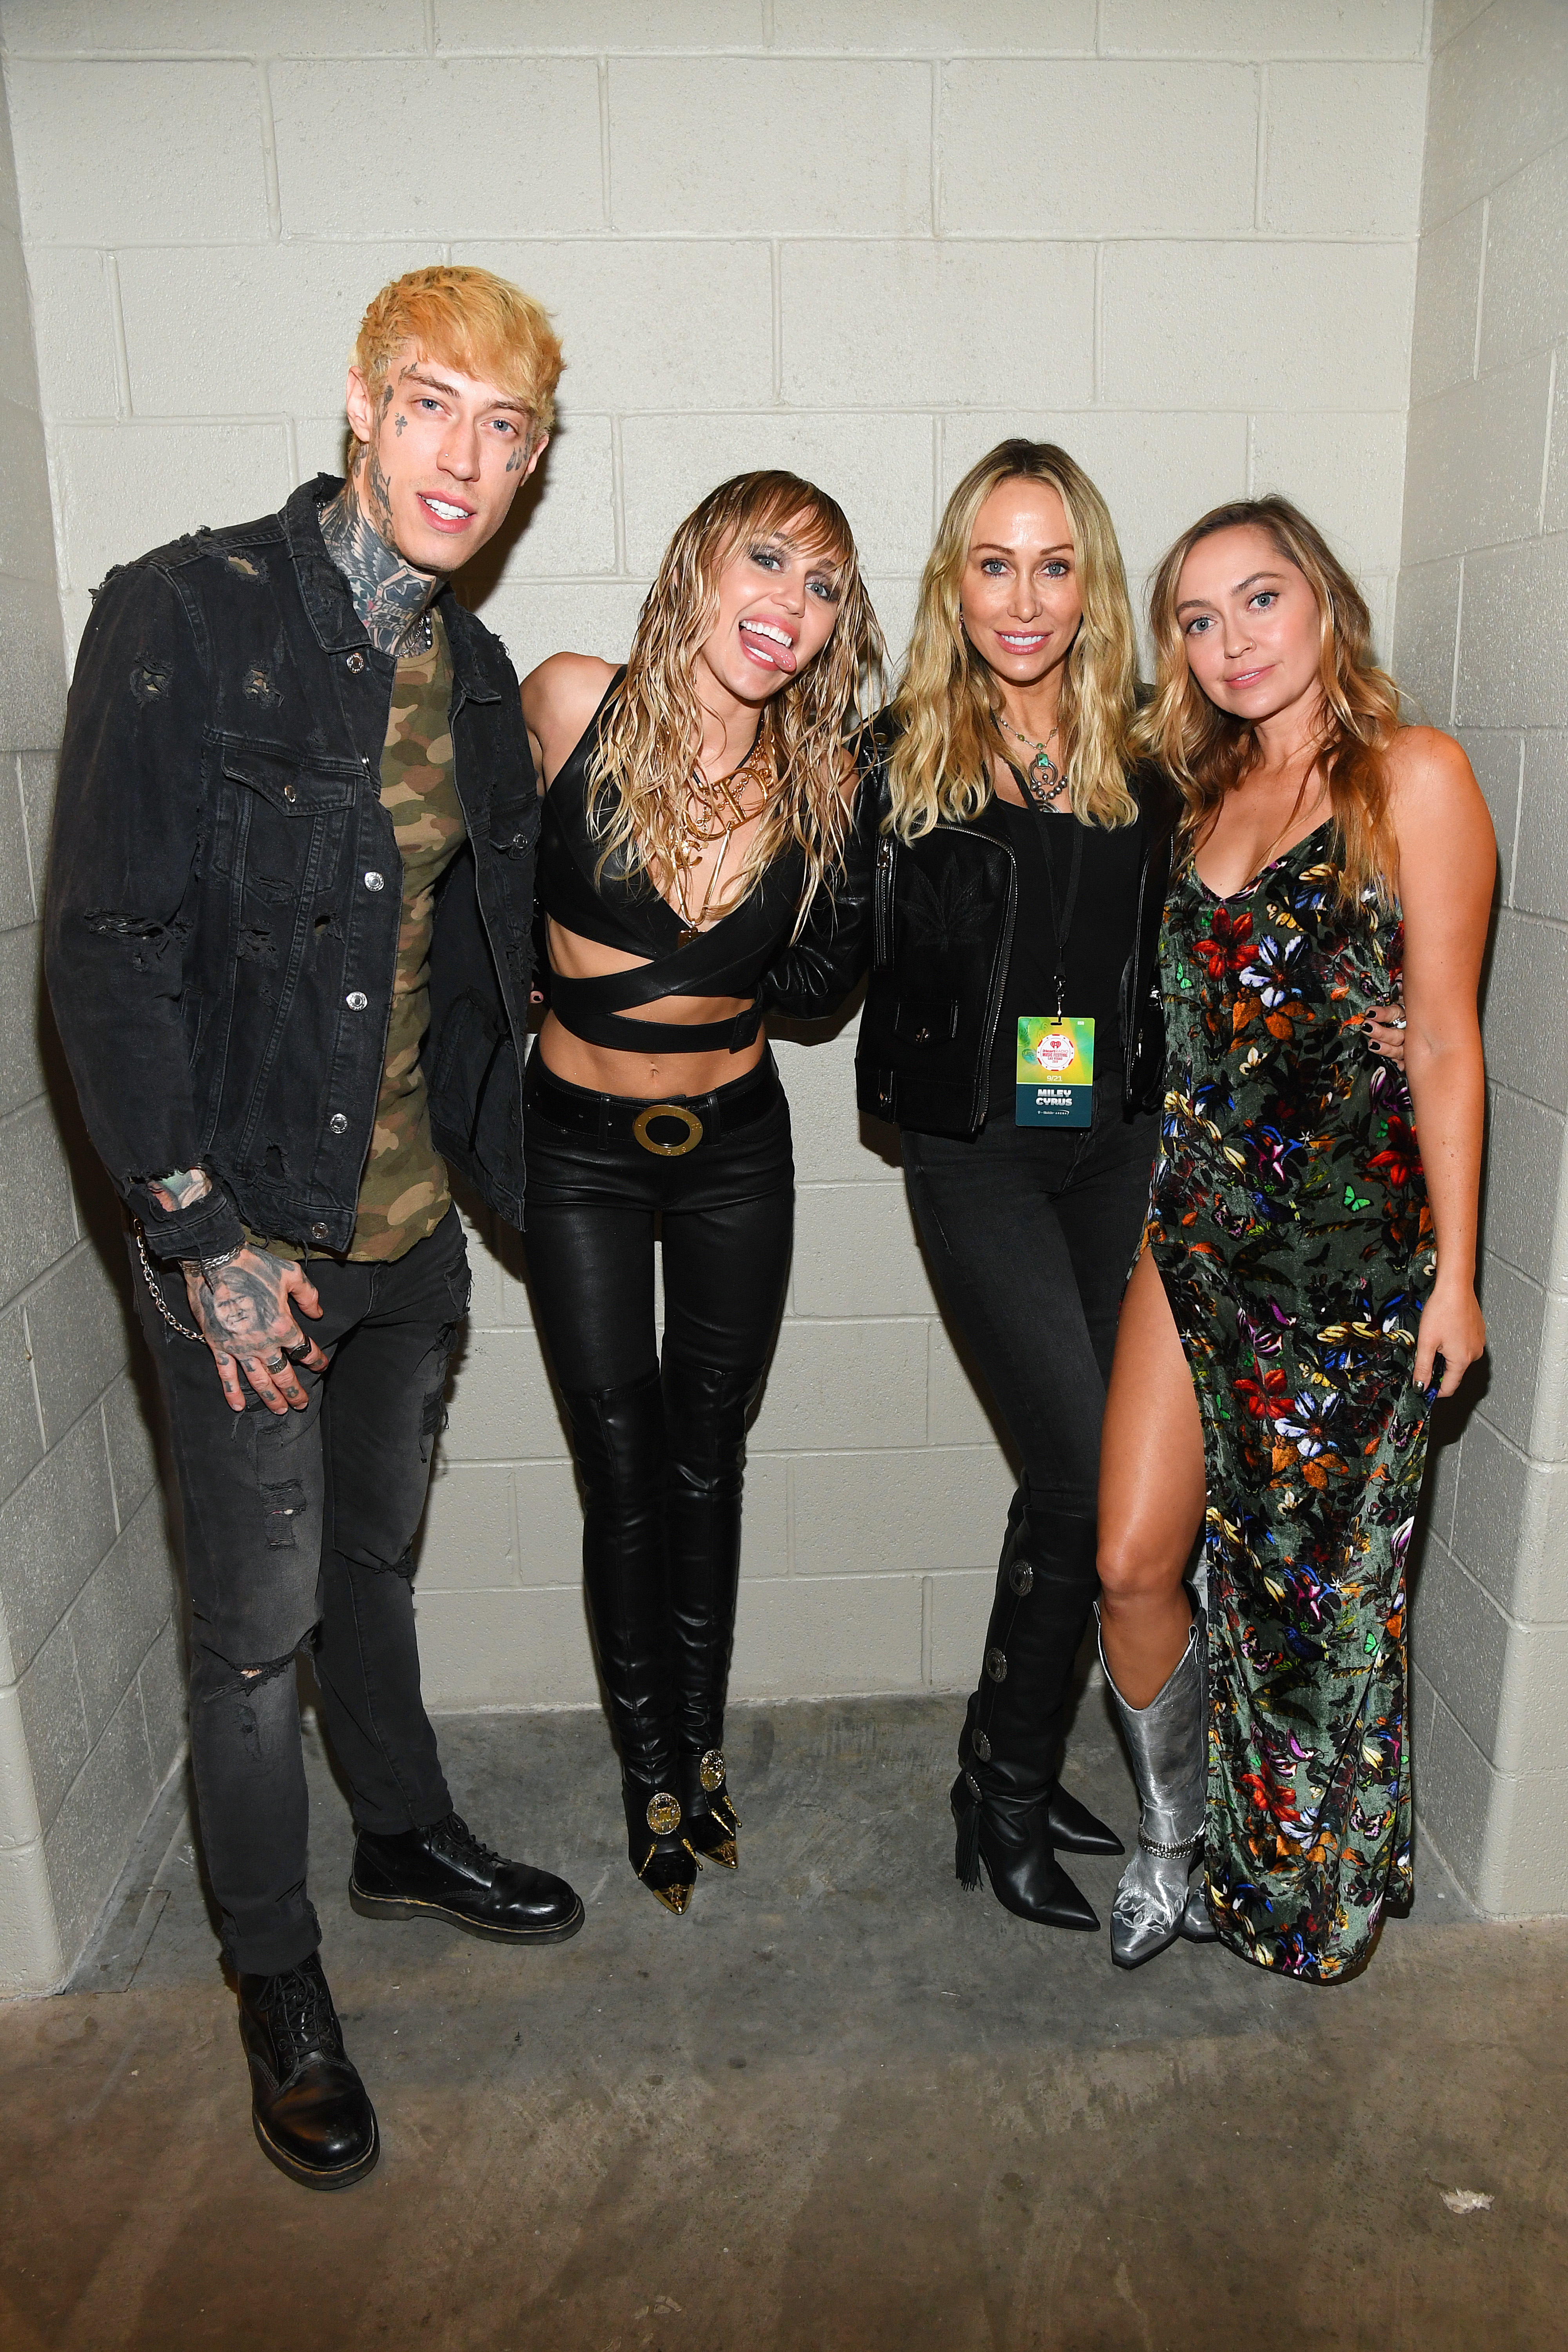 Members of the Cyrus family, including Miley and Tish, her mom